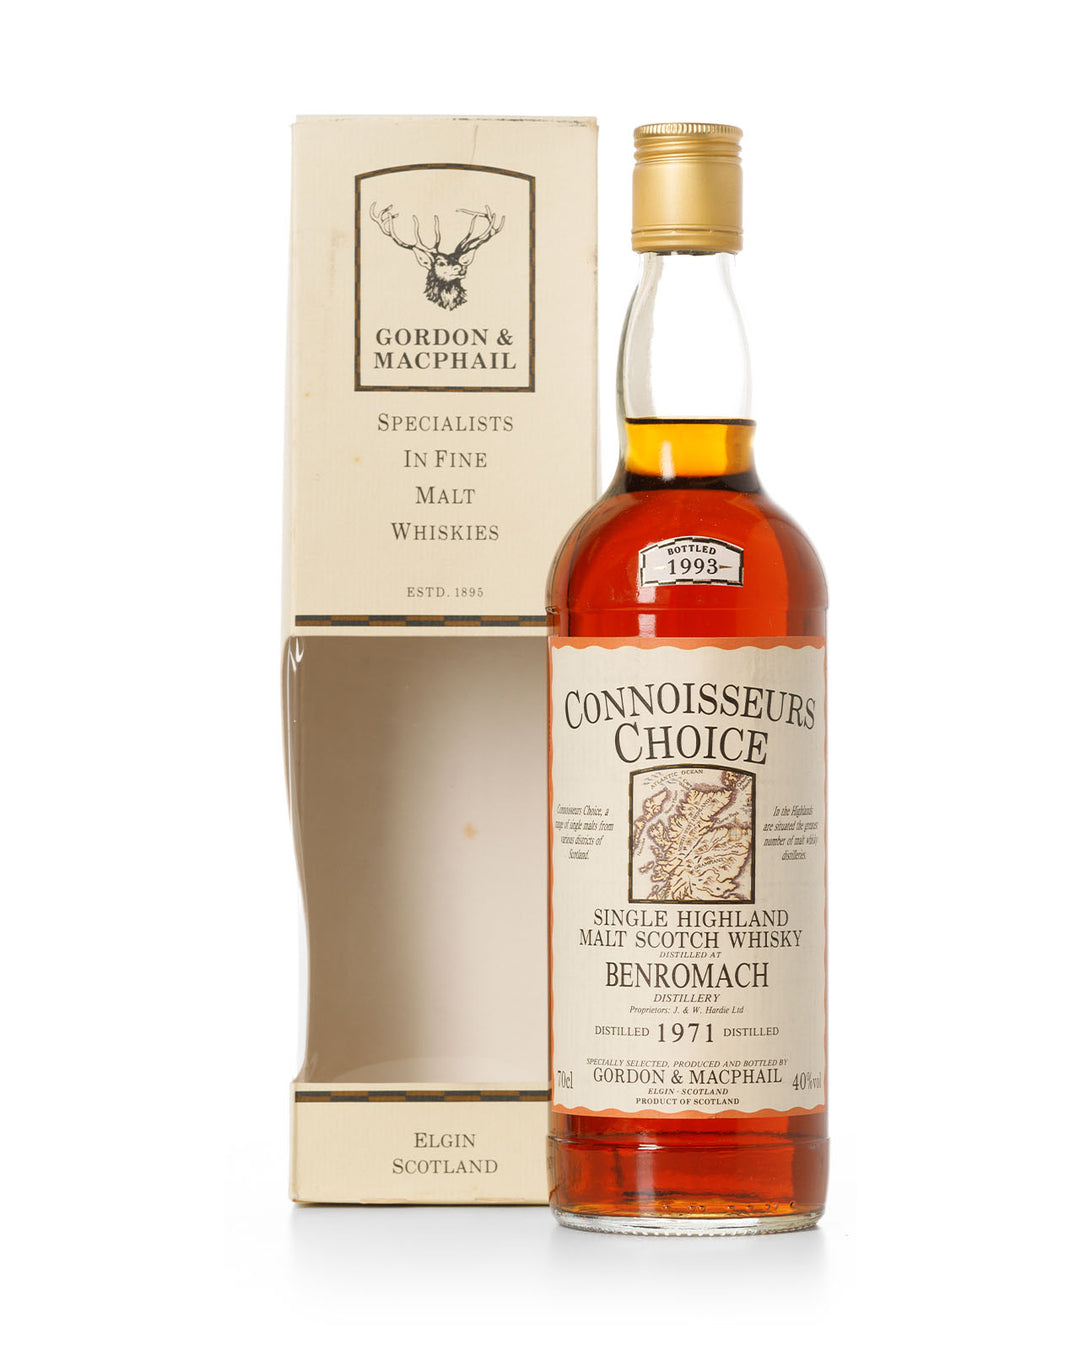 Benromach 1971 22 Year Old Connoisseurs Choice Gordon & Macphail Bottled 1993 With Original Box